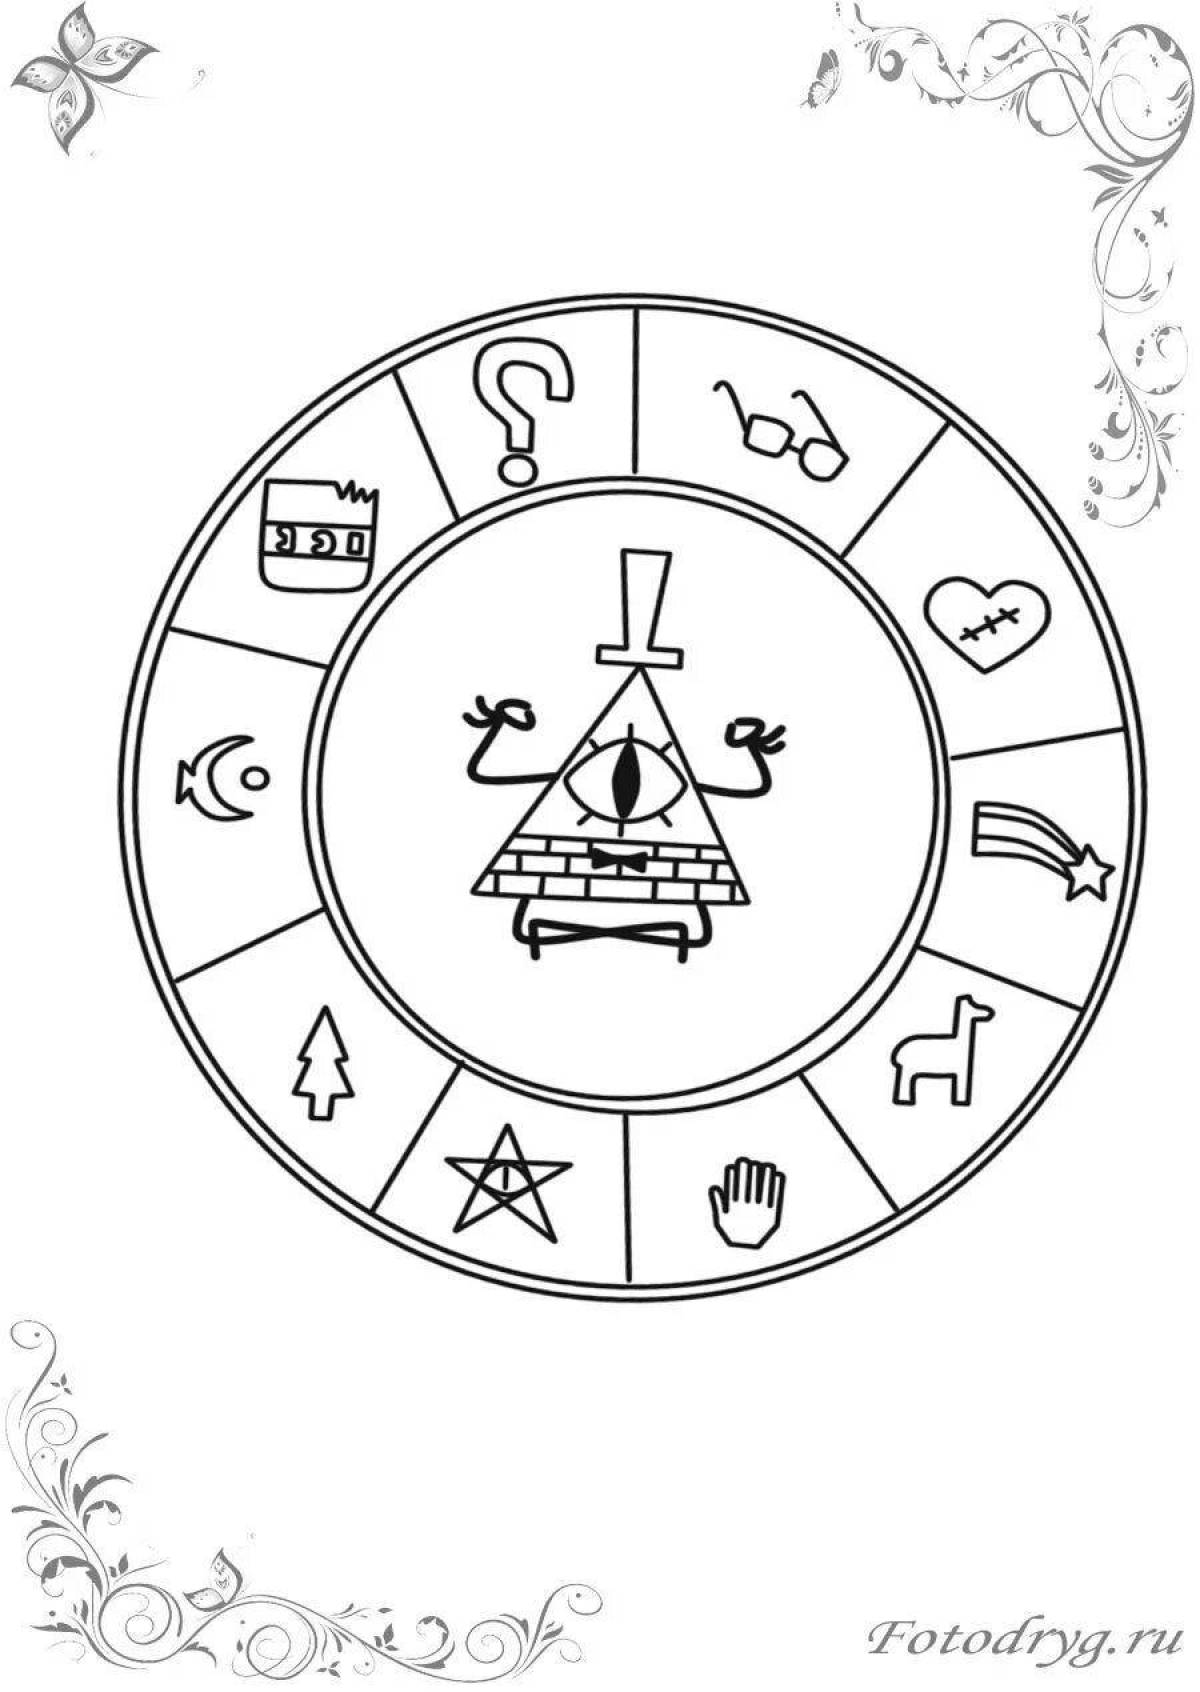 Adorable Gravity Falls Diary Coloring Page